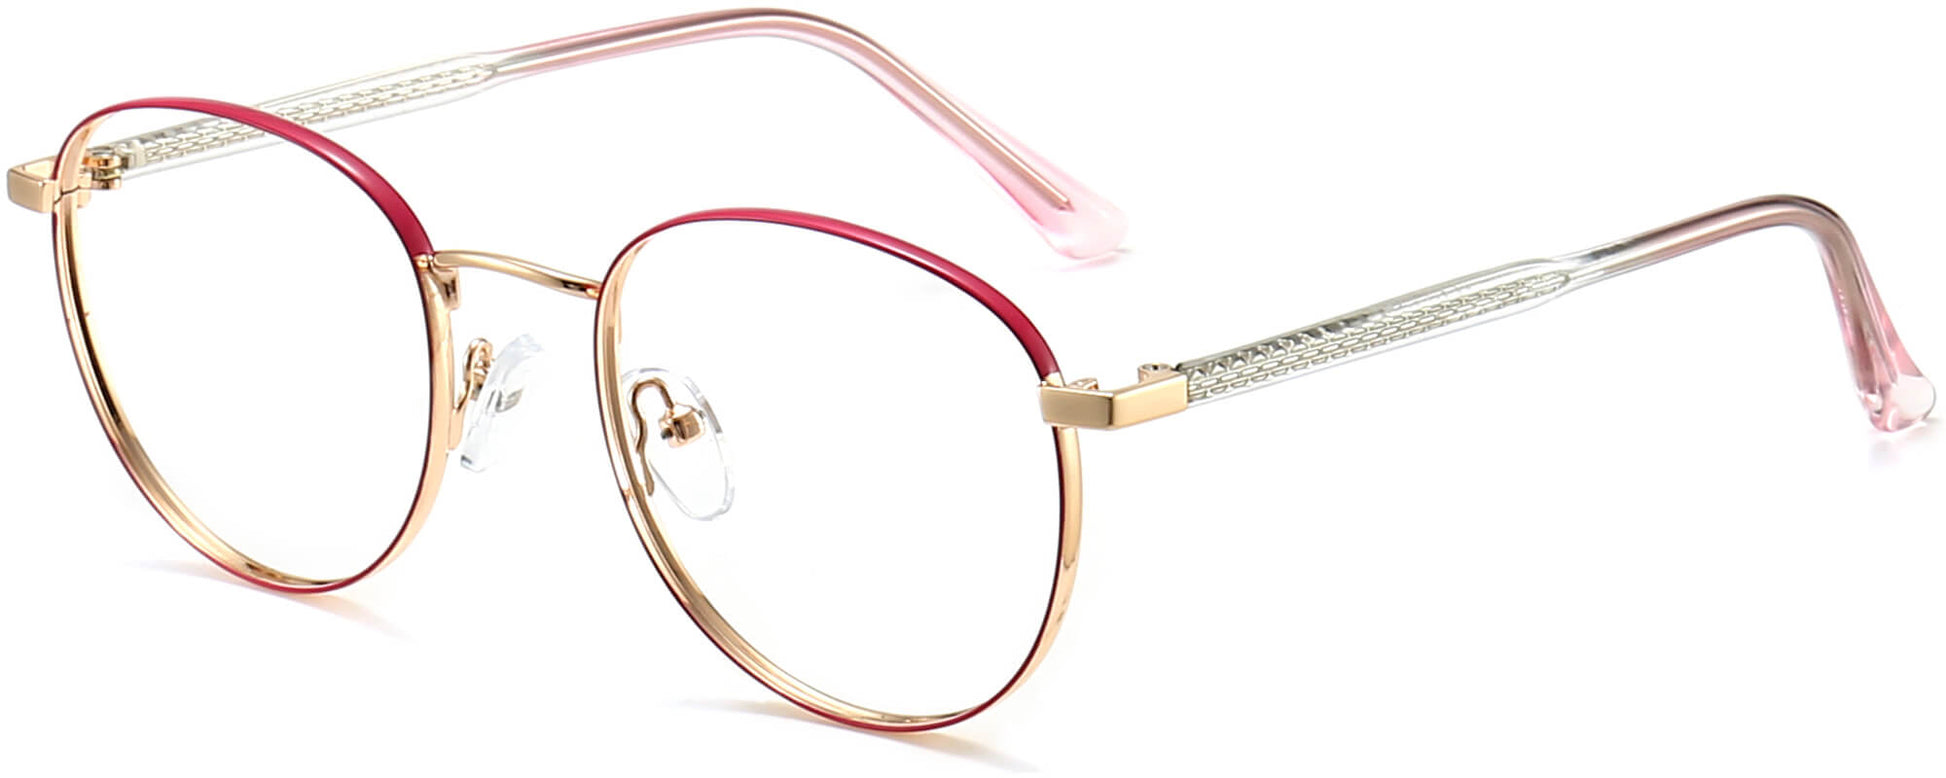 Saige Round Red Eyeglasses from ANRRI, angle view